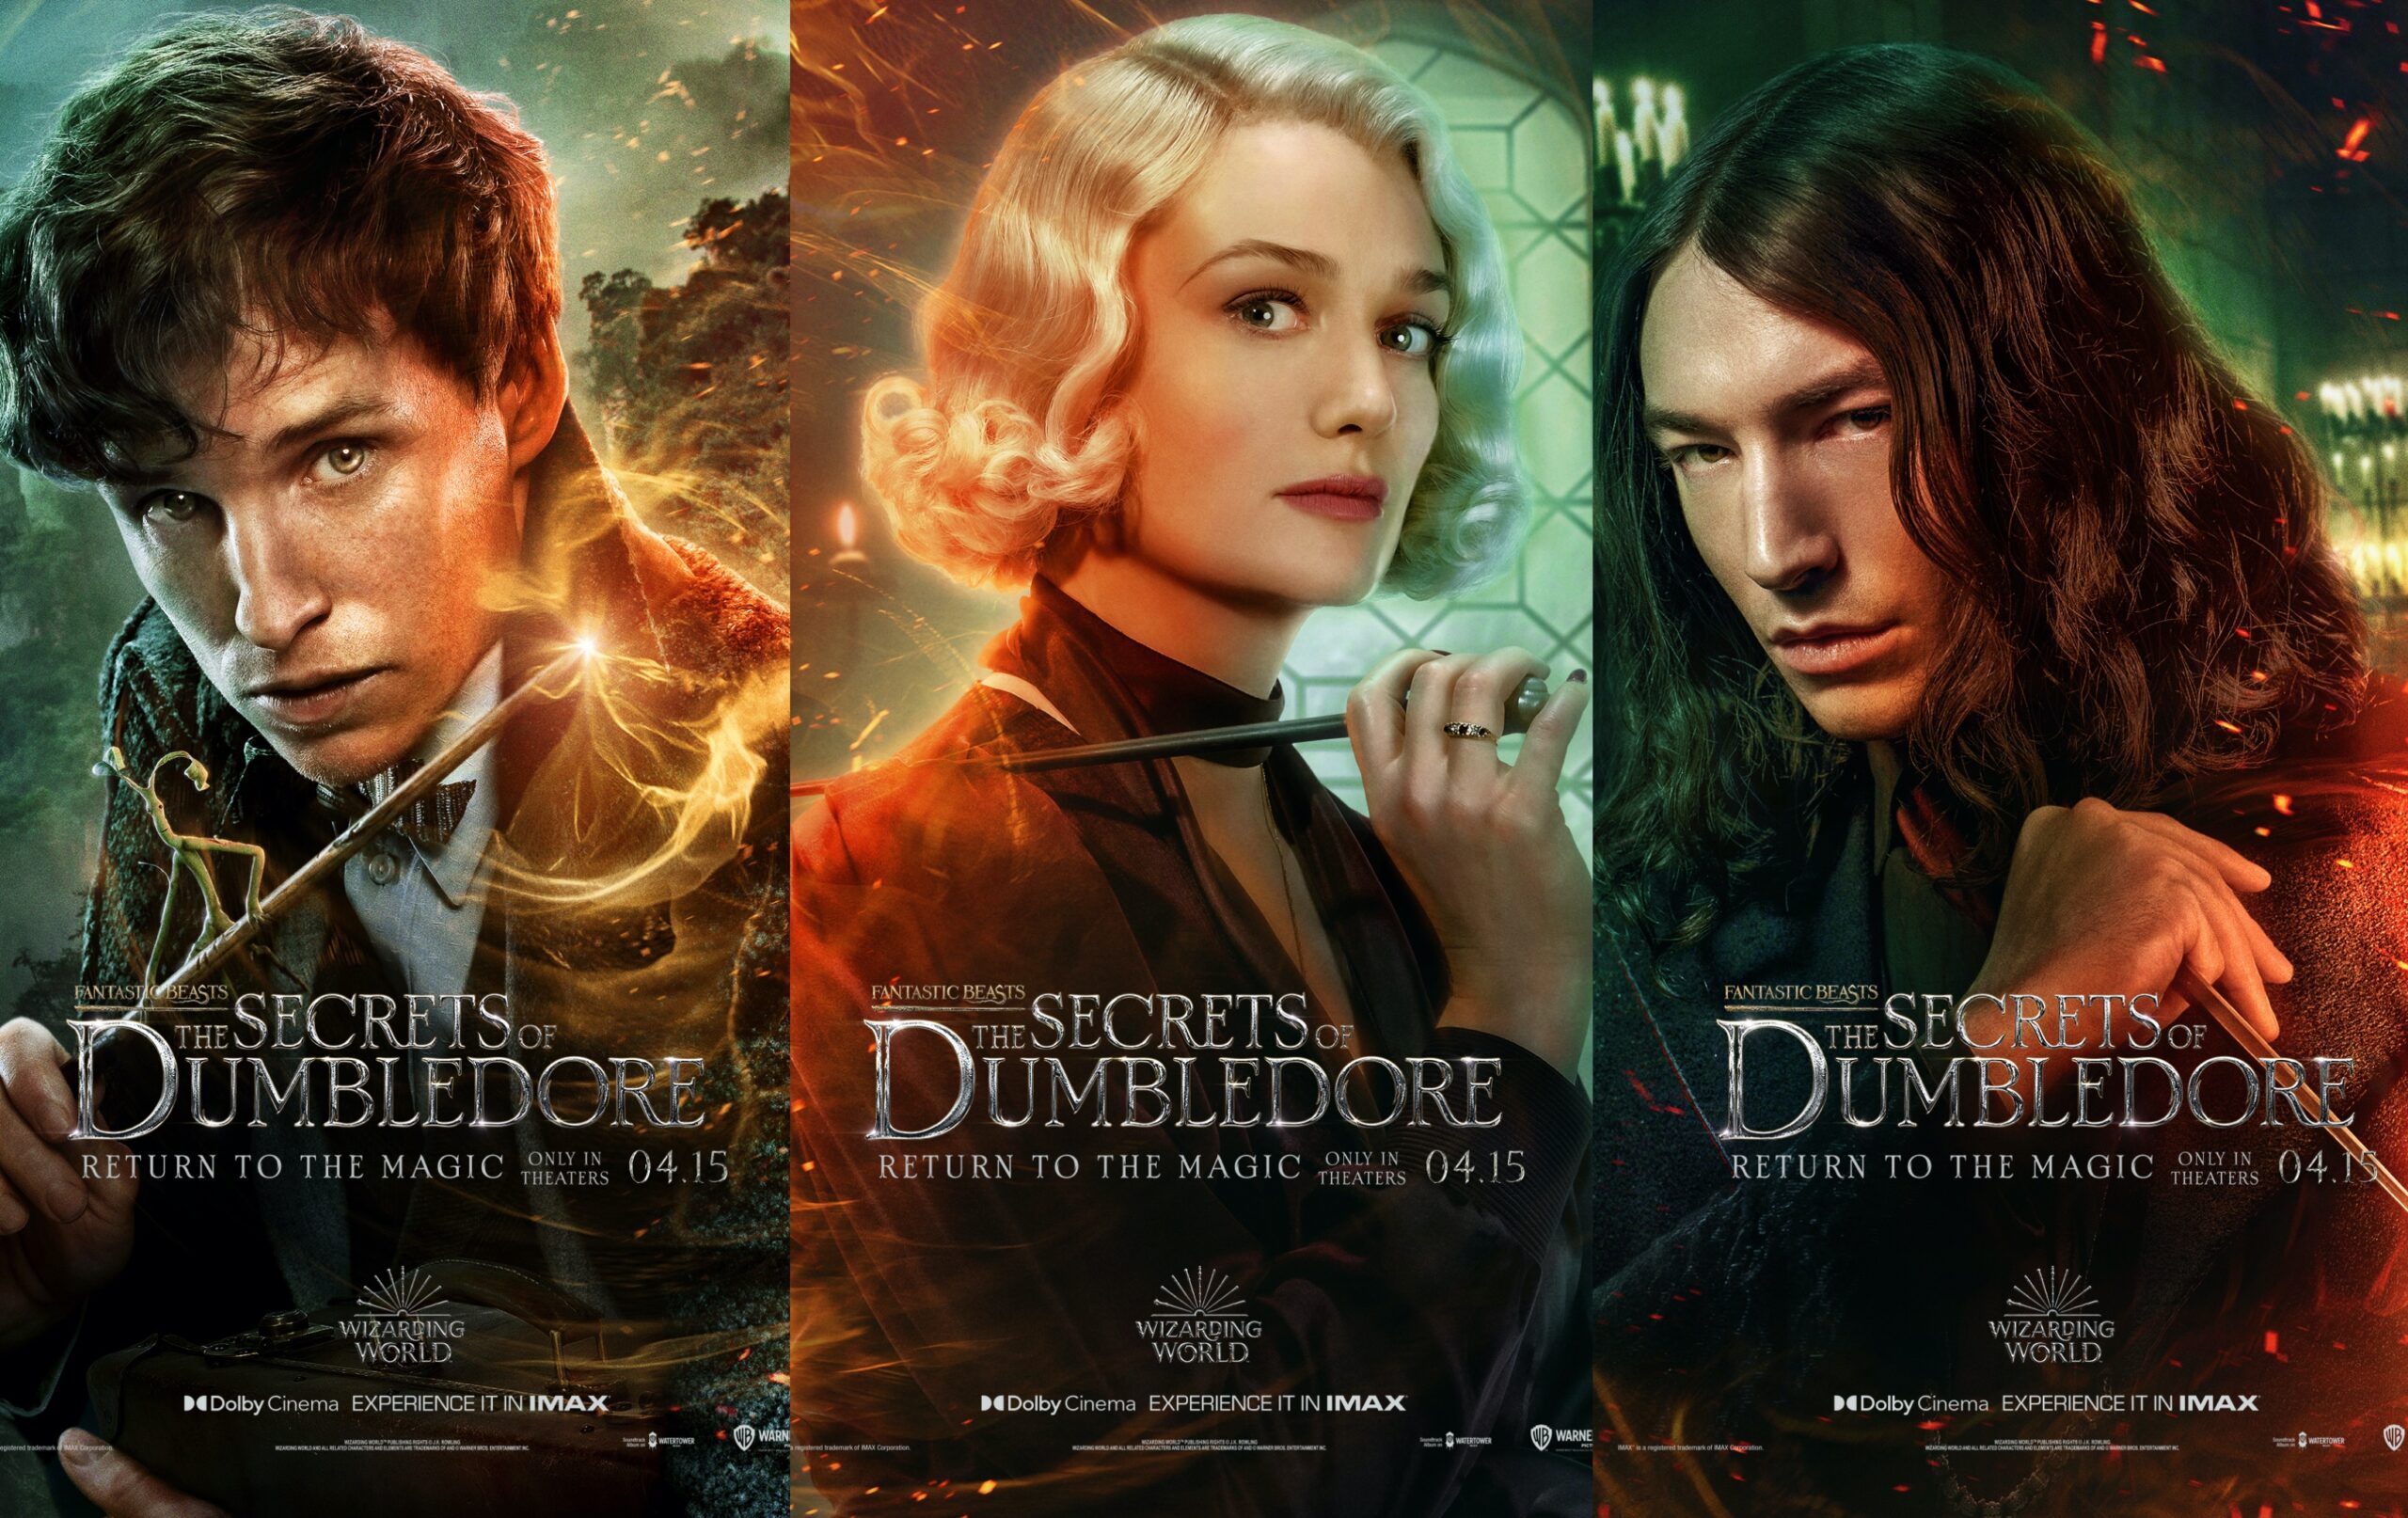 LOOK: 'Fantastic Beasts: The Secrets of Dumbledore' releases new character posters